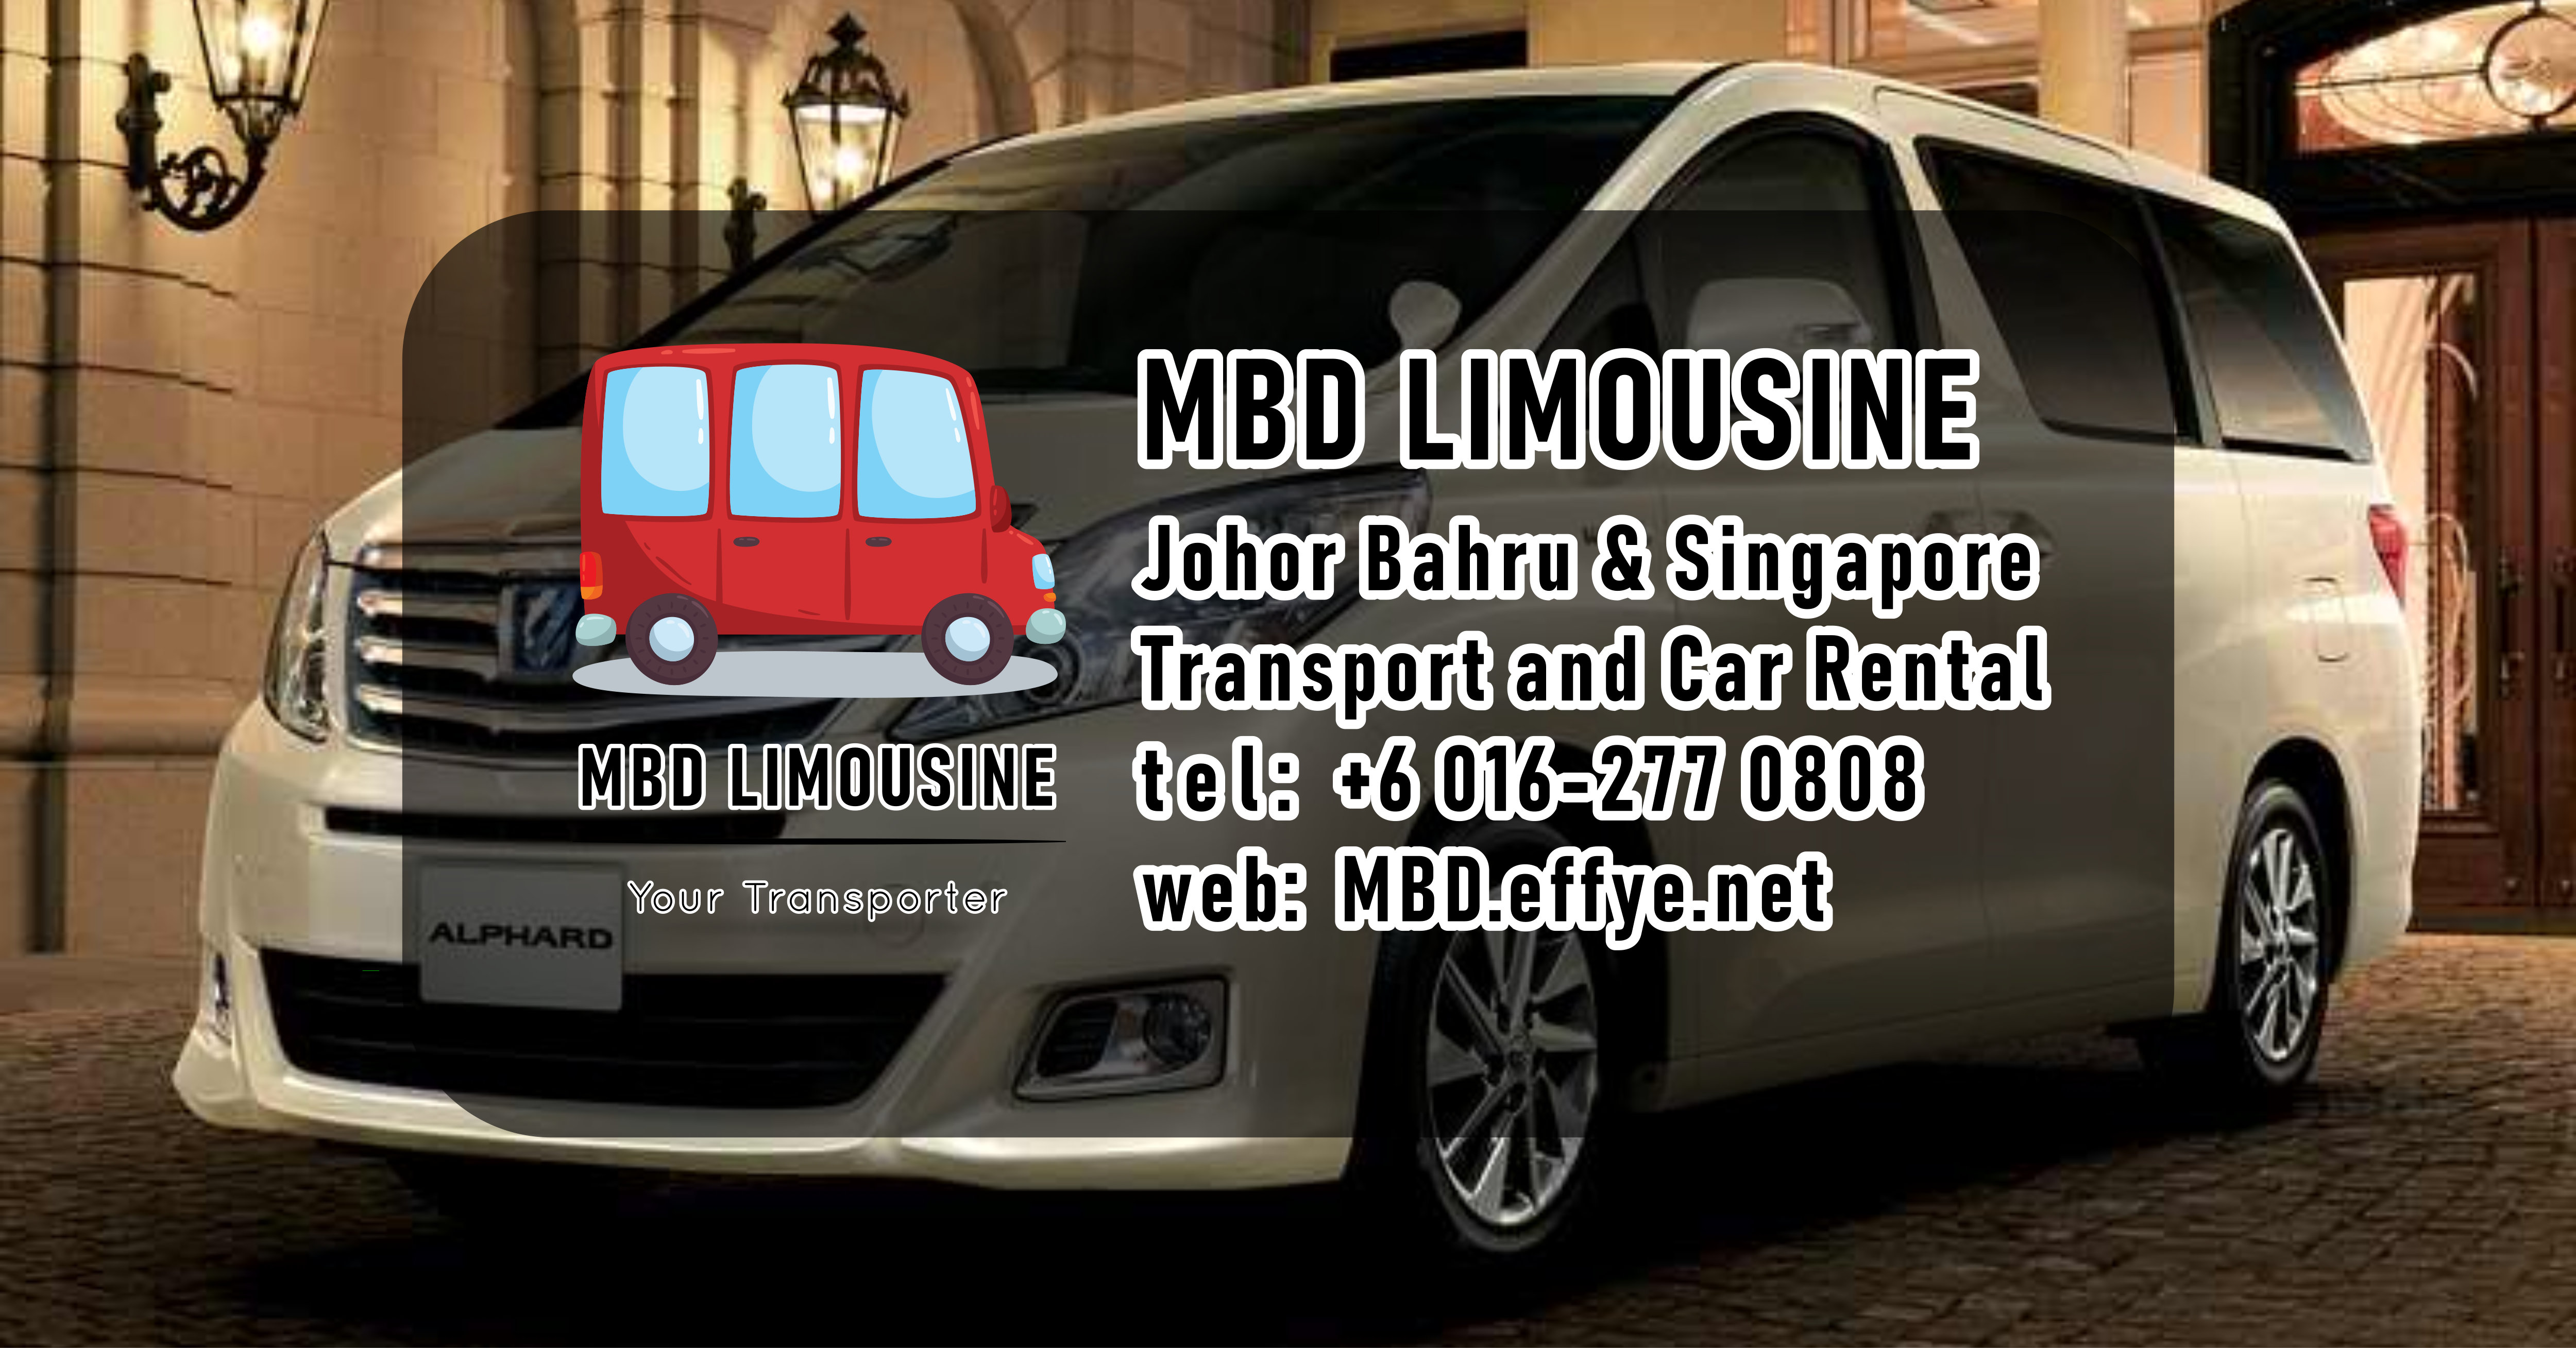 MBD Limousine Sdn Bhd –  Transport and Car Rental